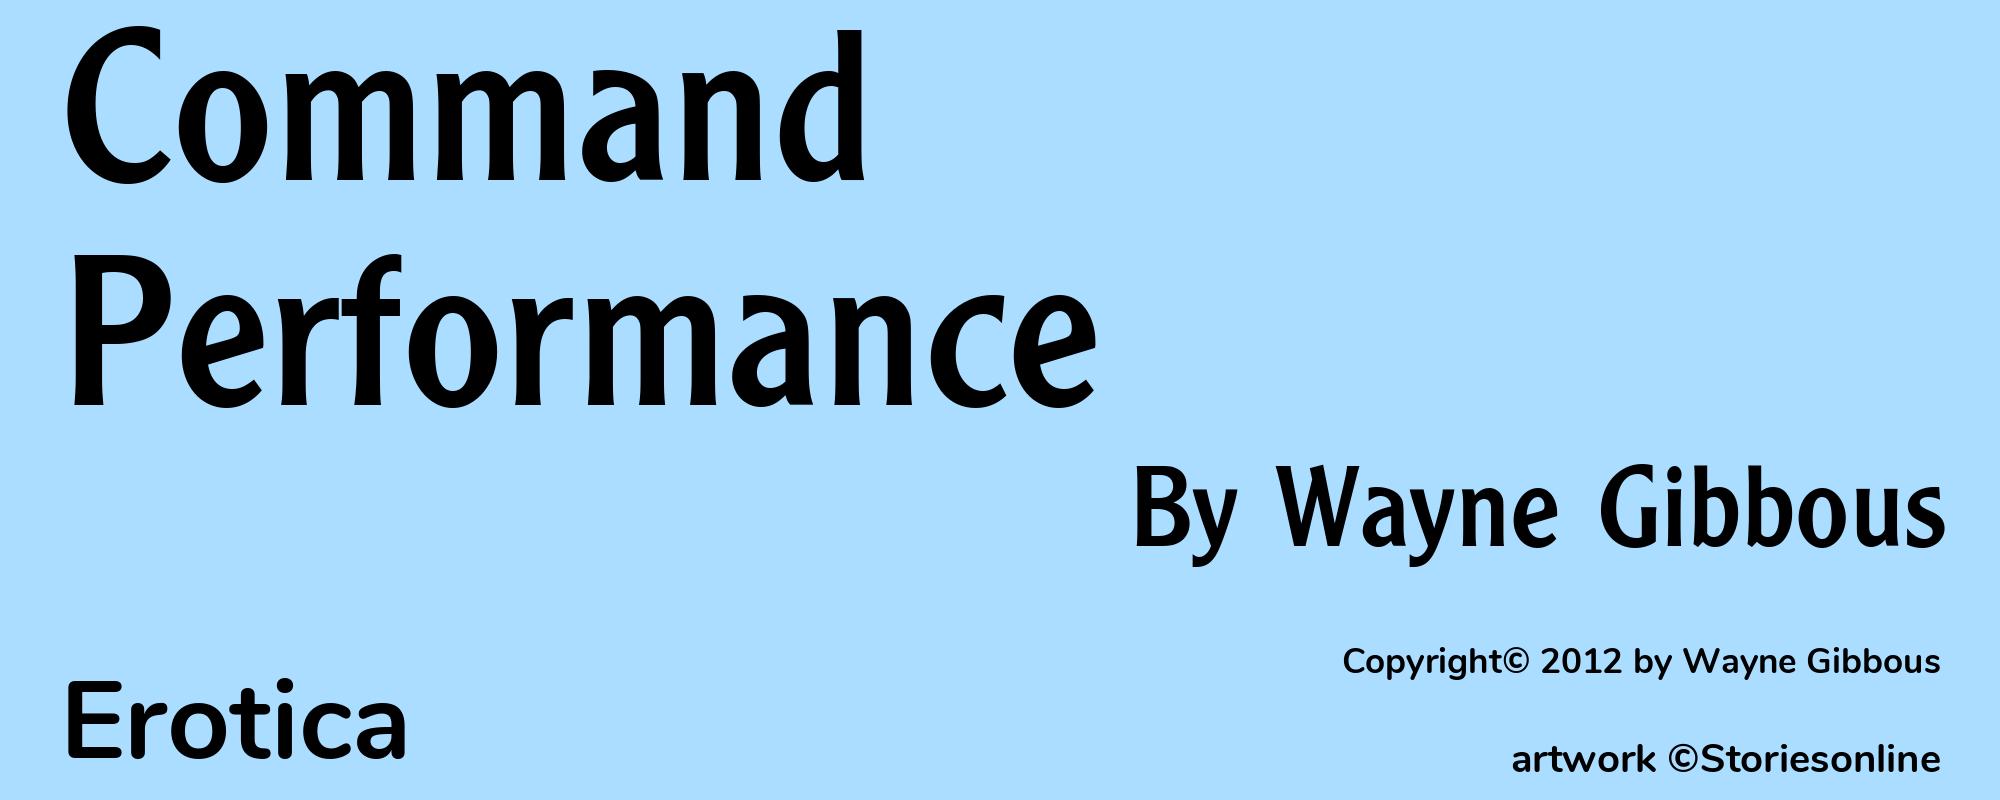 Command Performance - Cover